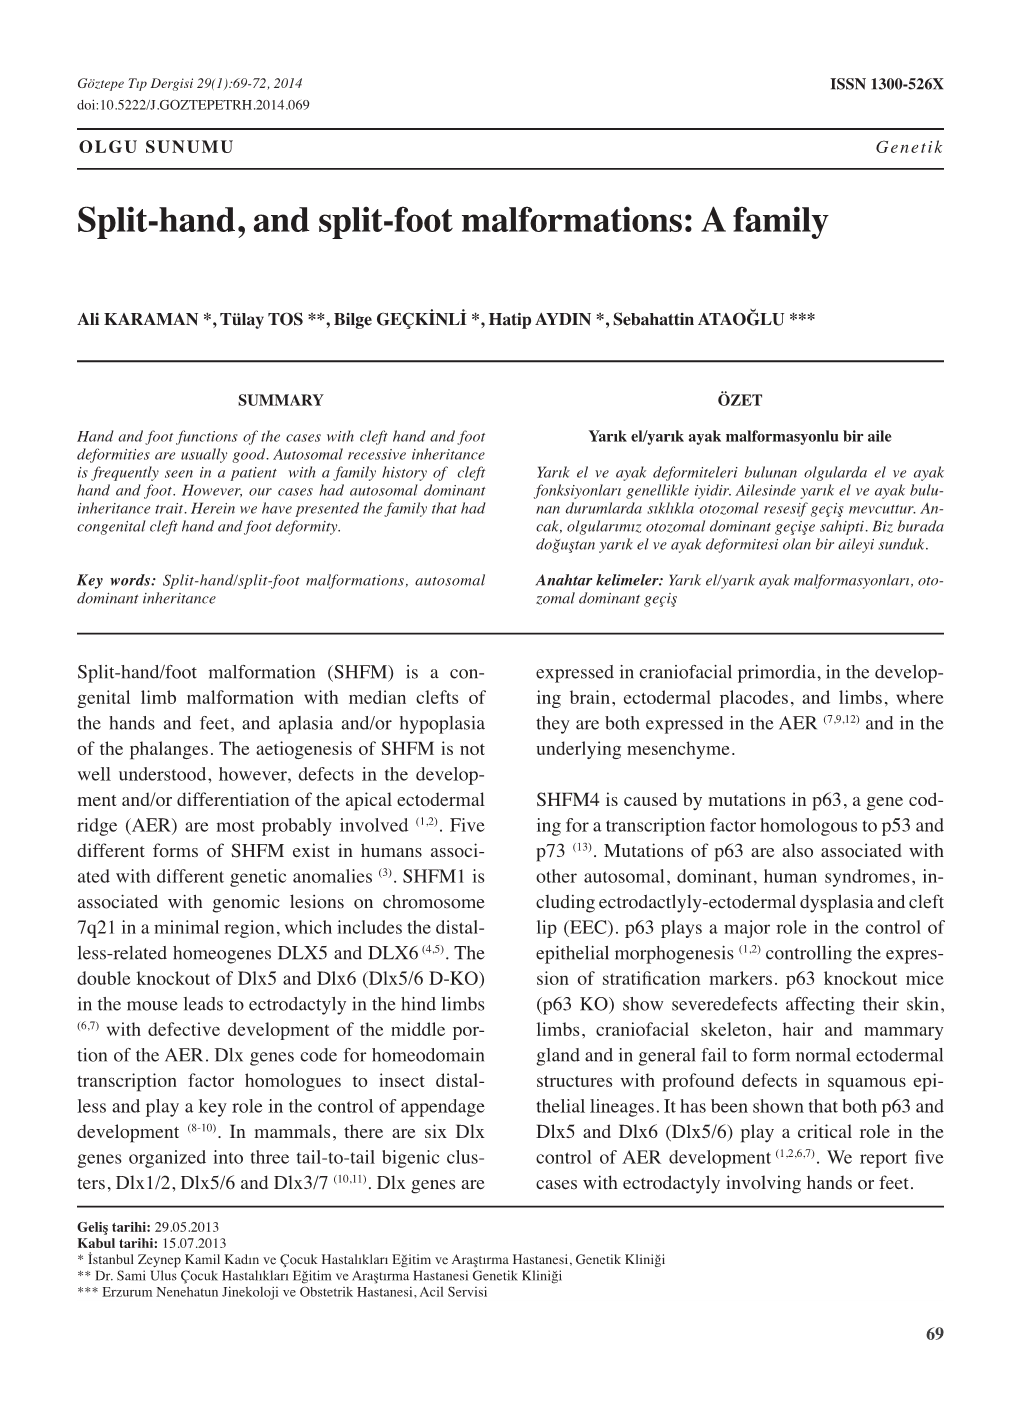 Split-Hand, and Split-Foot Malformations: a Family